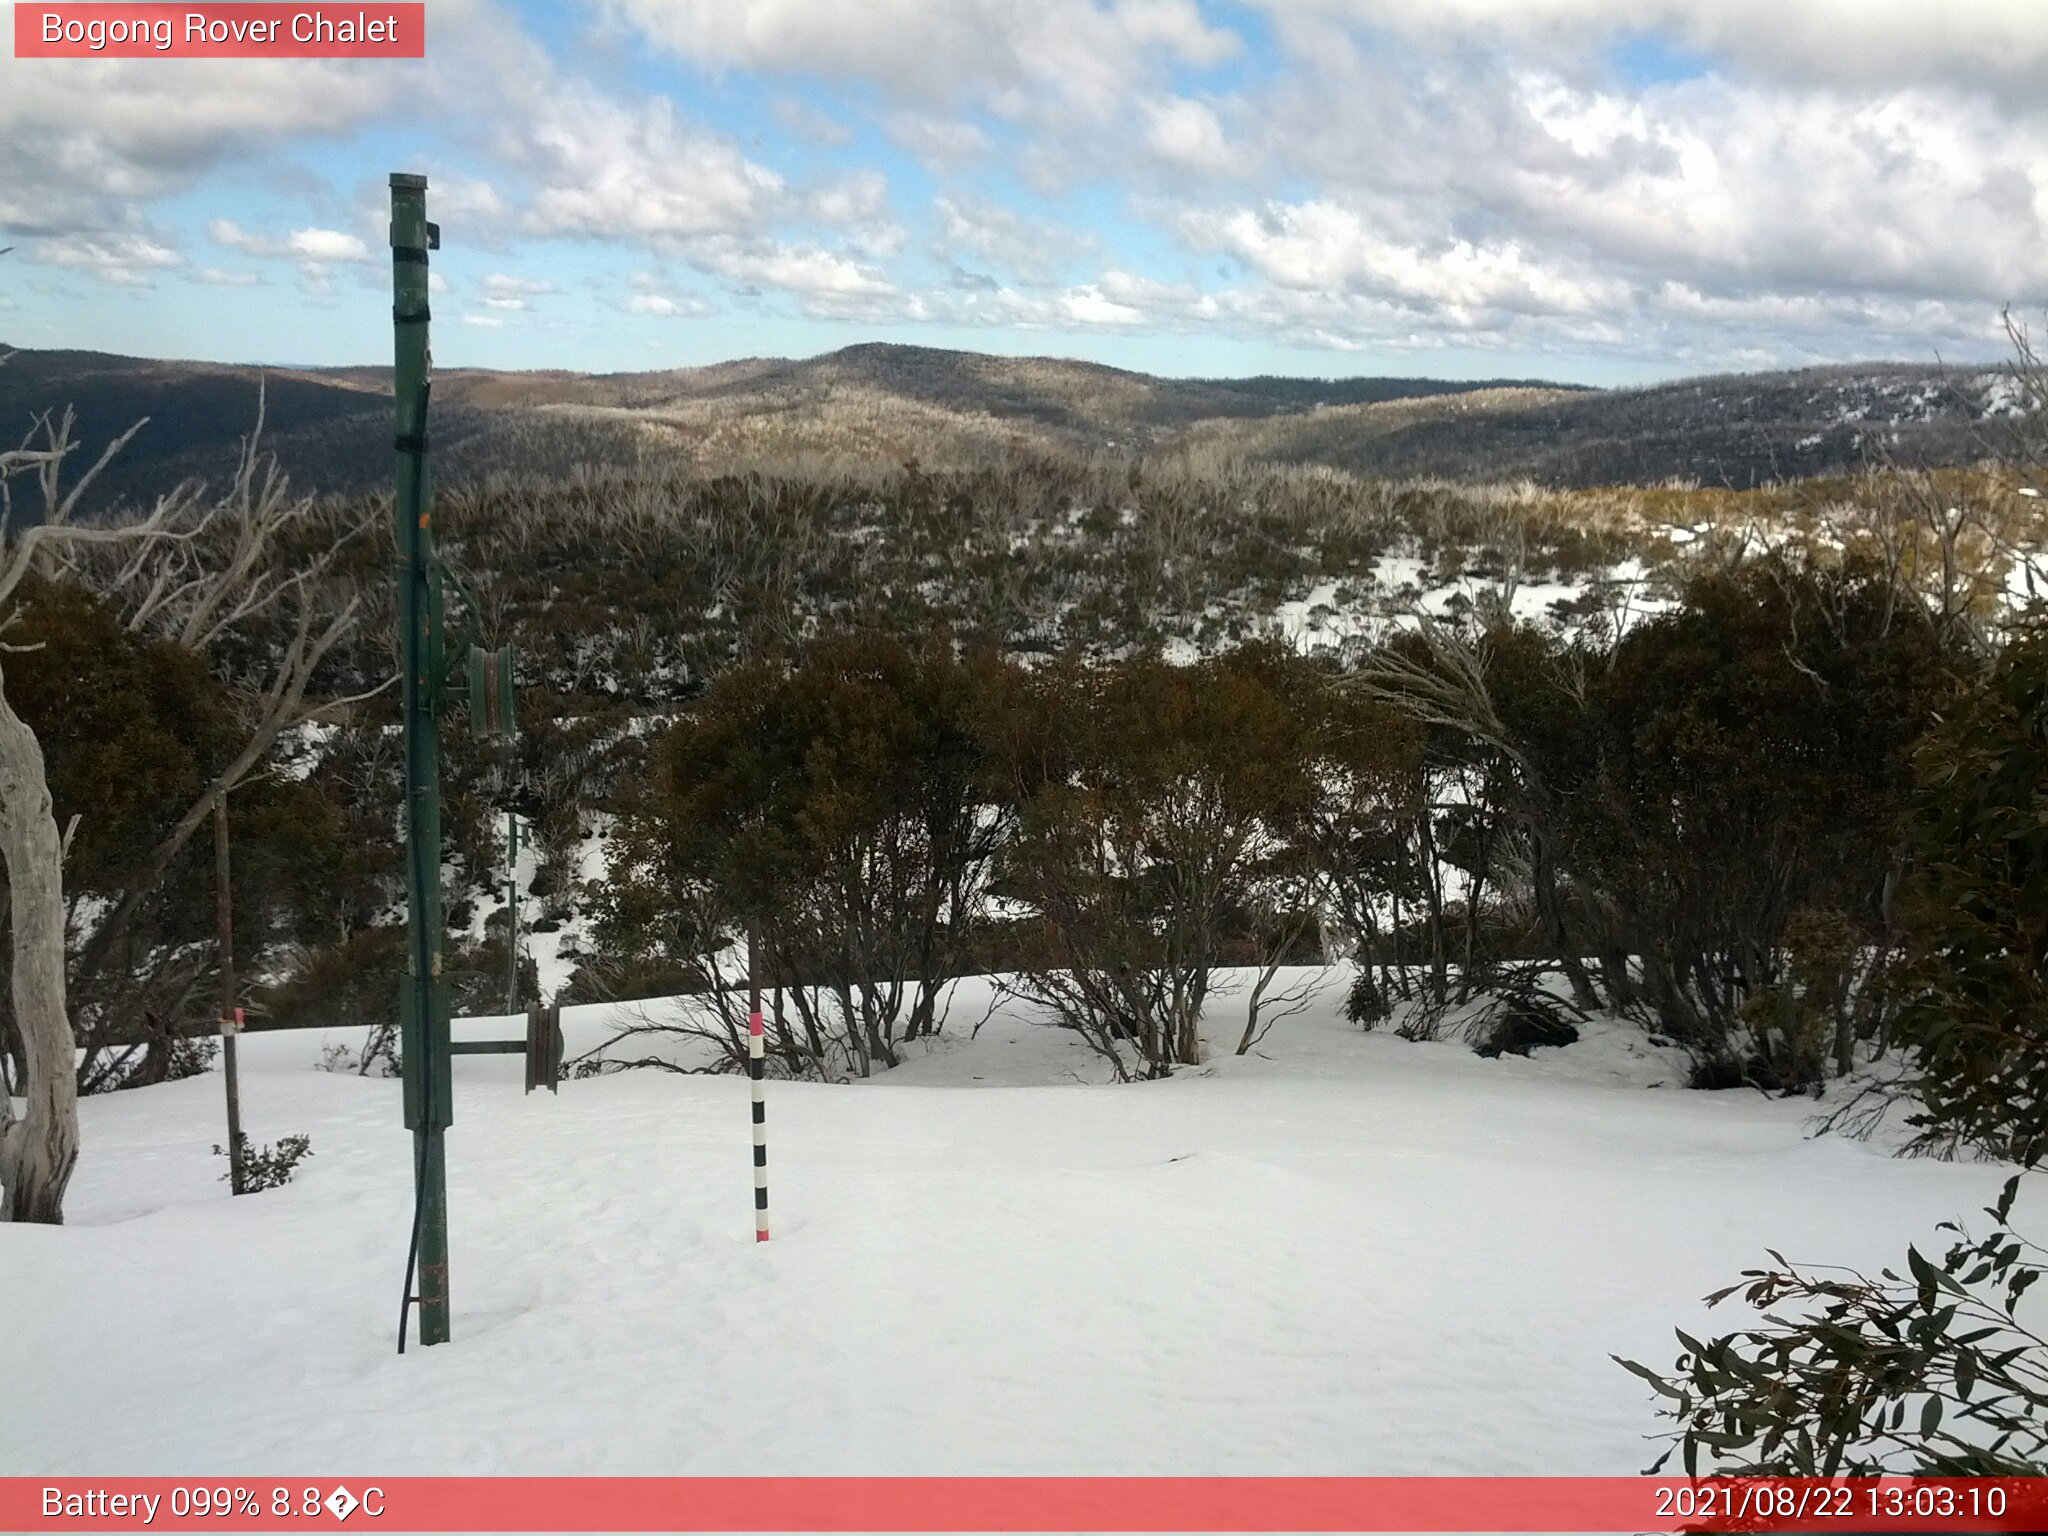 Bogong Web Cam 1:03pm Sunday 22nd of August 2021